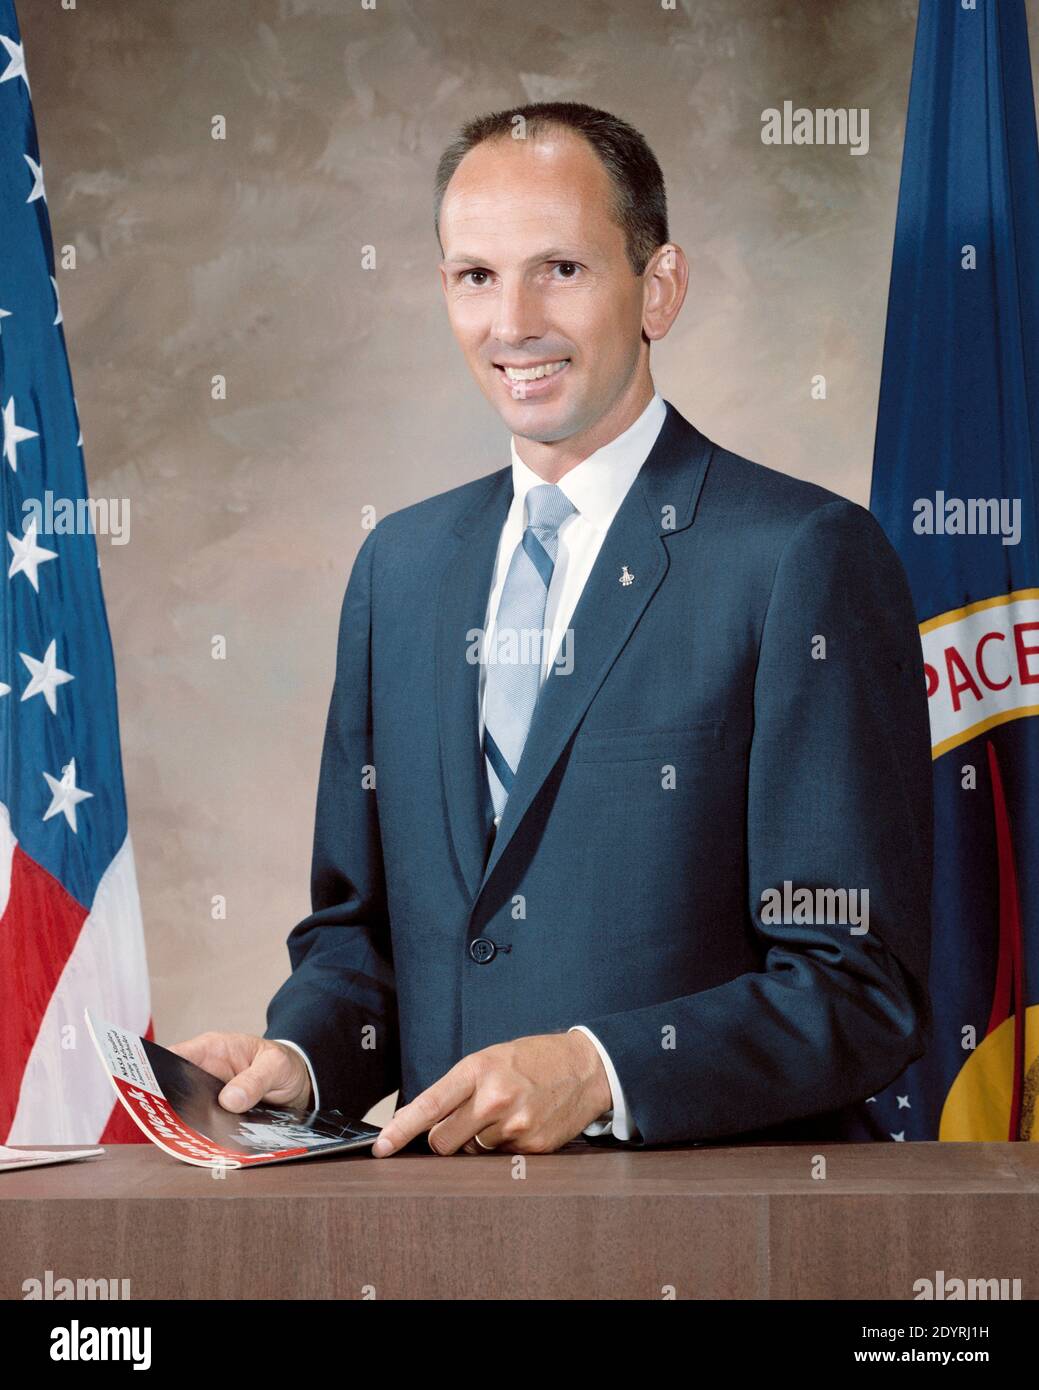 Theodore Cordy 'Ted' Freeman (1930 – October 31, 1964), American aeronautical engineer, U.S. Air Force officer, test pilot, and NASA astronaut. Selected in the third group of NASA astronauts in 1963, he was killed a year later in the crash of a T-38 jet, marking the first fatality among the NASA Astronaut Corps Stock Photo